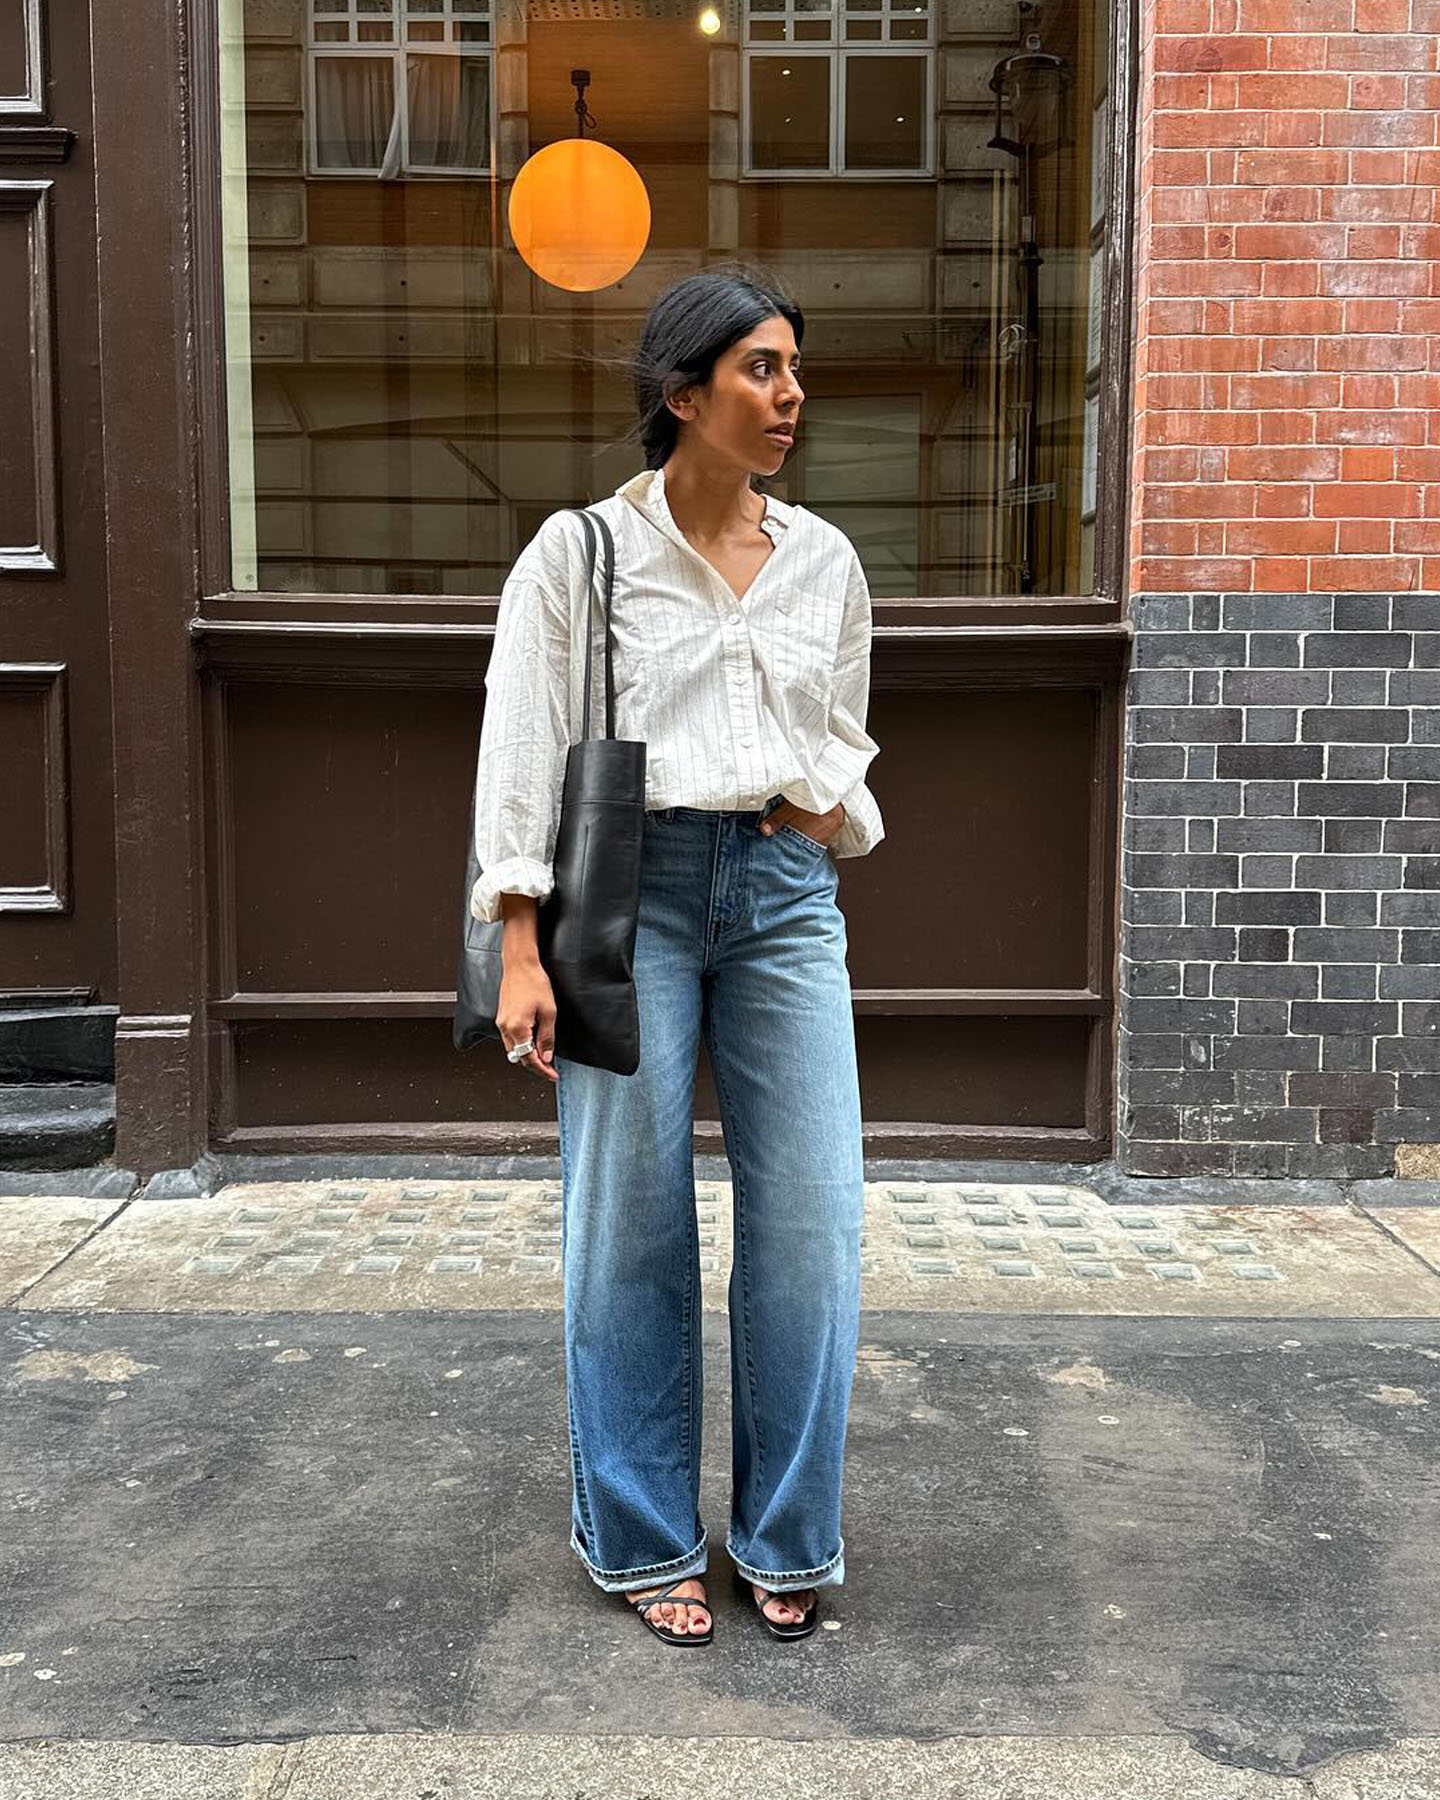 British fashion influencer Monikh poses on the sidewalk wearing a striped white button-down shirt, cuffed jeans, and strappy sandals